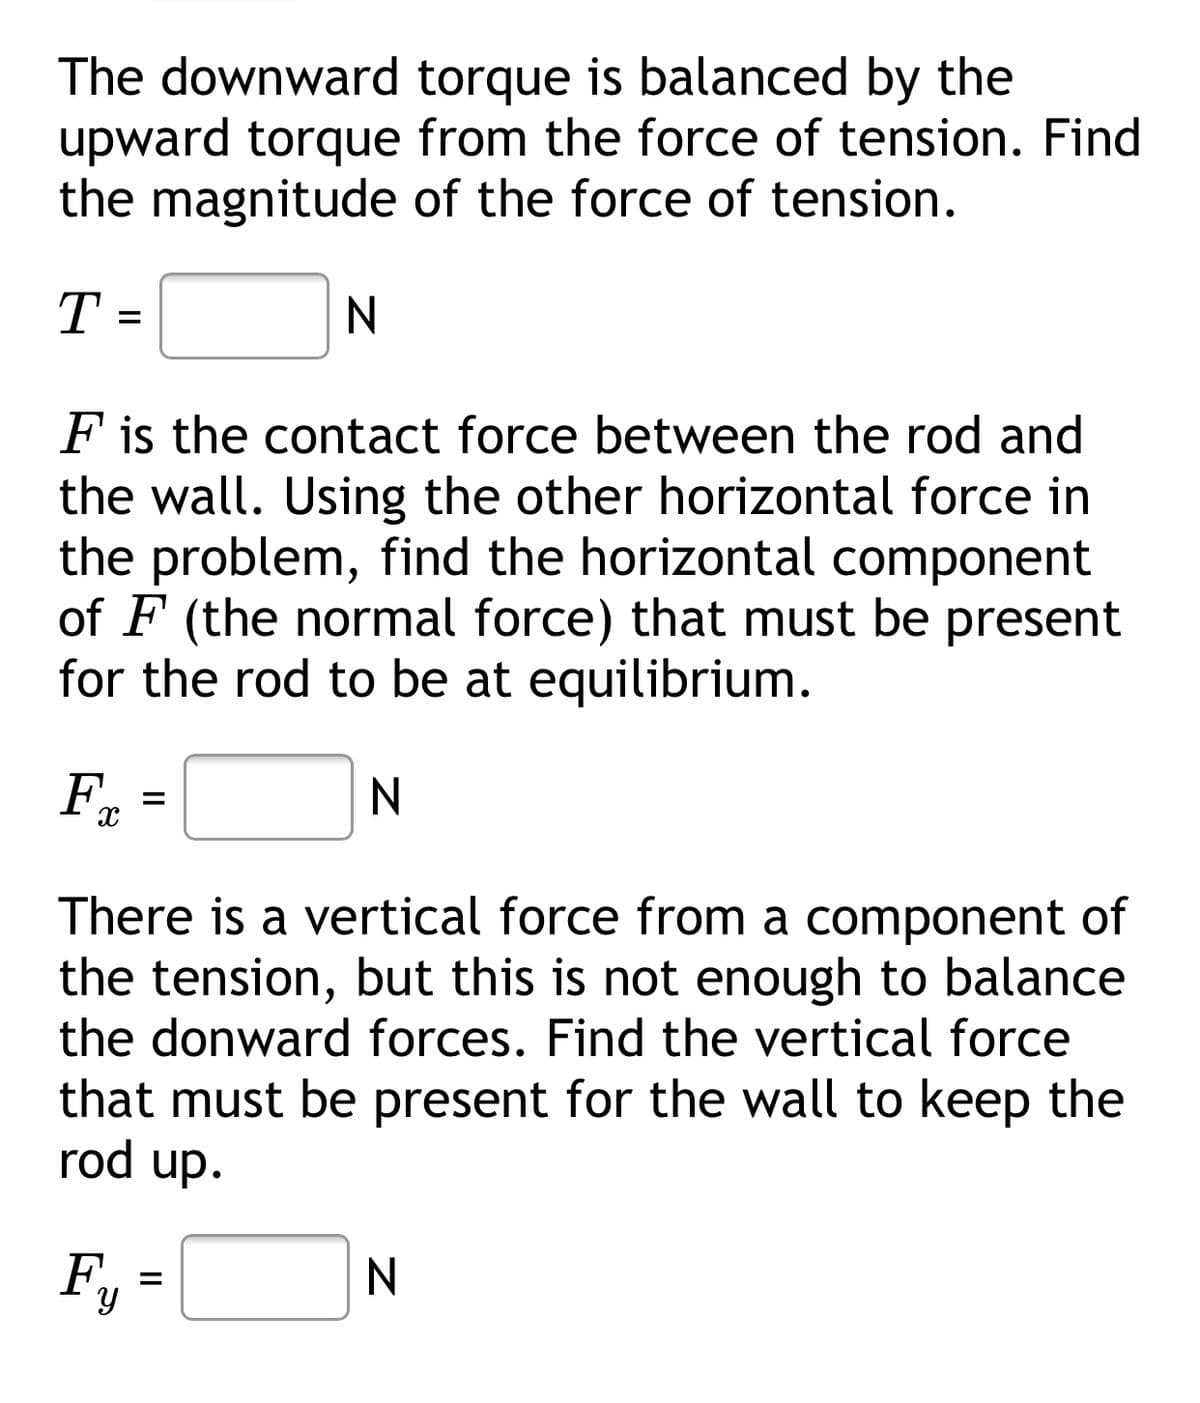 The downward torque is balanced by the
upward torque from the force of tension. Find
the magnitude of the force of tension.
T =
F is the contact force between the rod and
the wall. Using the other horizontal force in
the problem, find the horizontal component
of F (the normal force) that must be present
for the rod to be at equilibrium.
F.
There is a vertical force from a component of
the tension, but this is not enough to balance
the donward forces. Find the vertical force
that must be present for the wall to keep the
rod up.
F,
N
